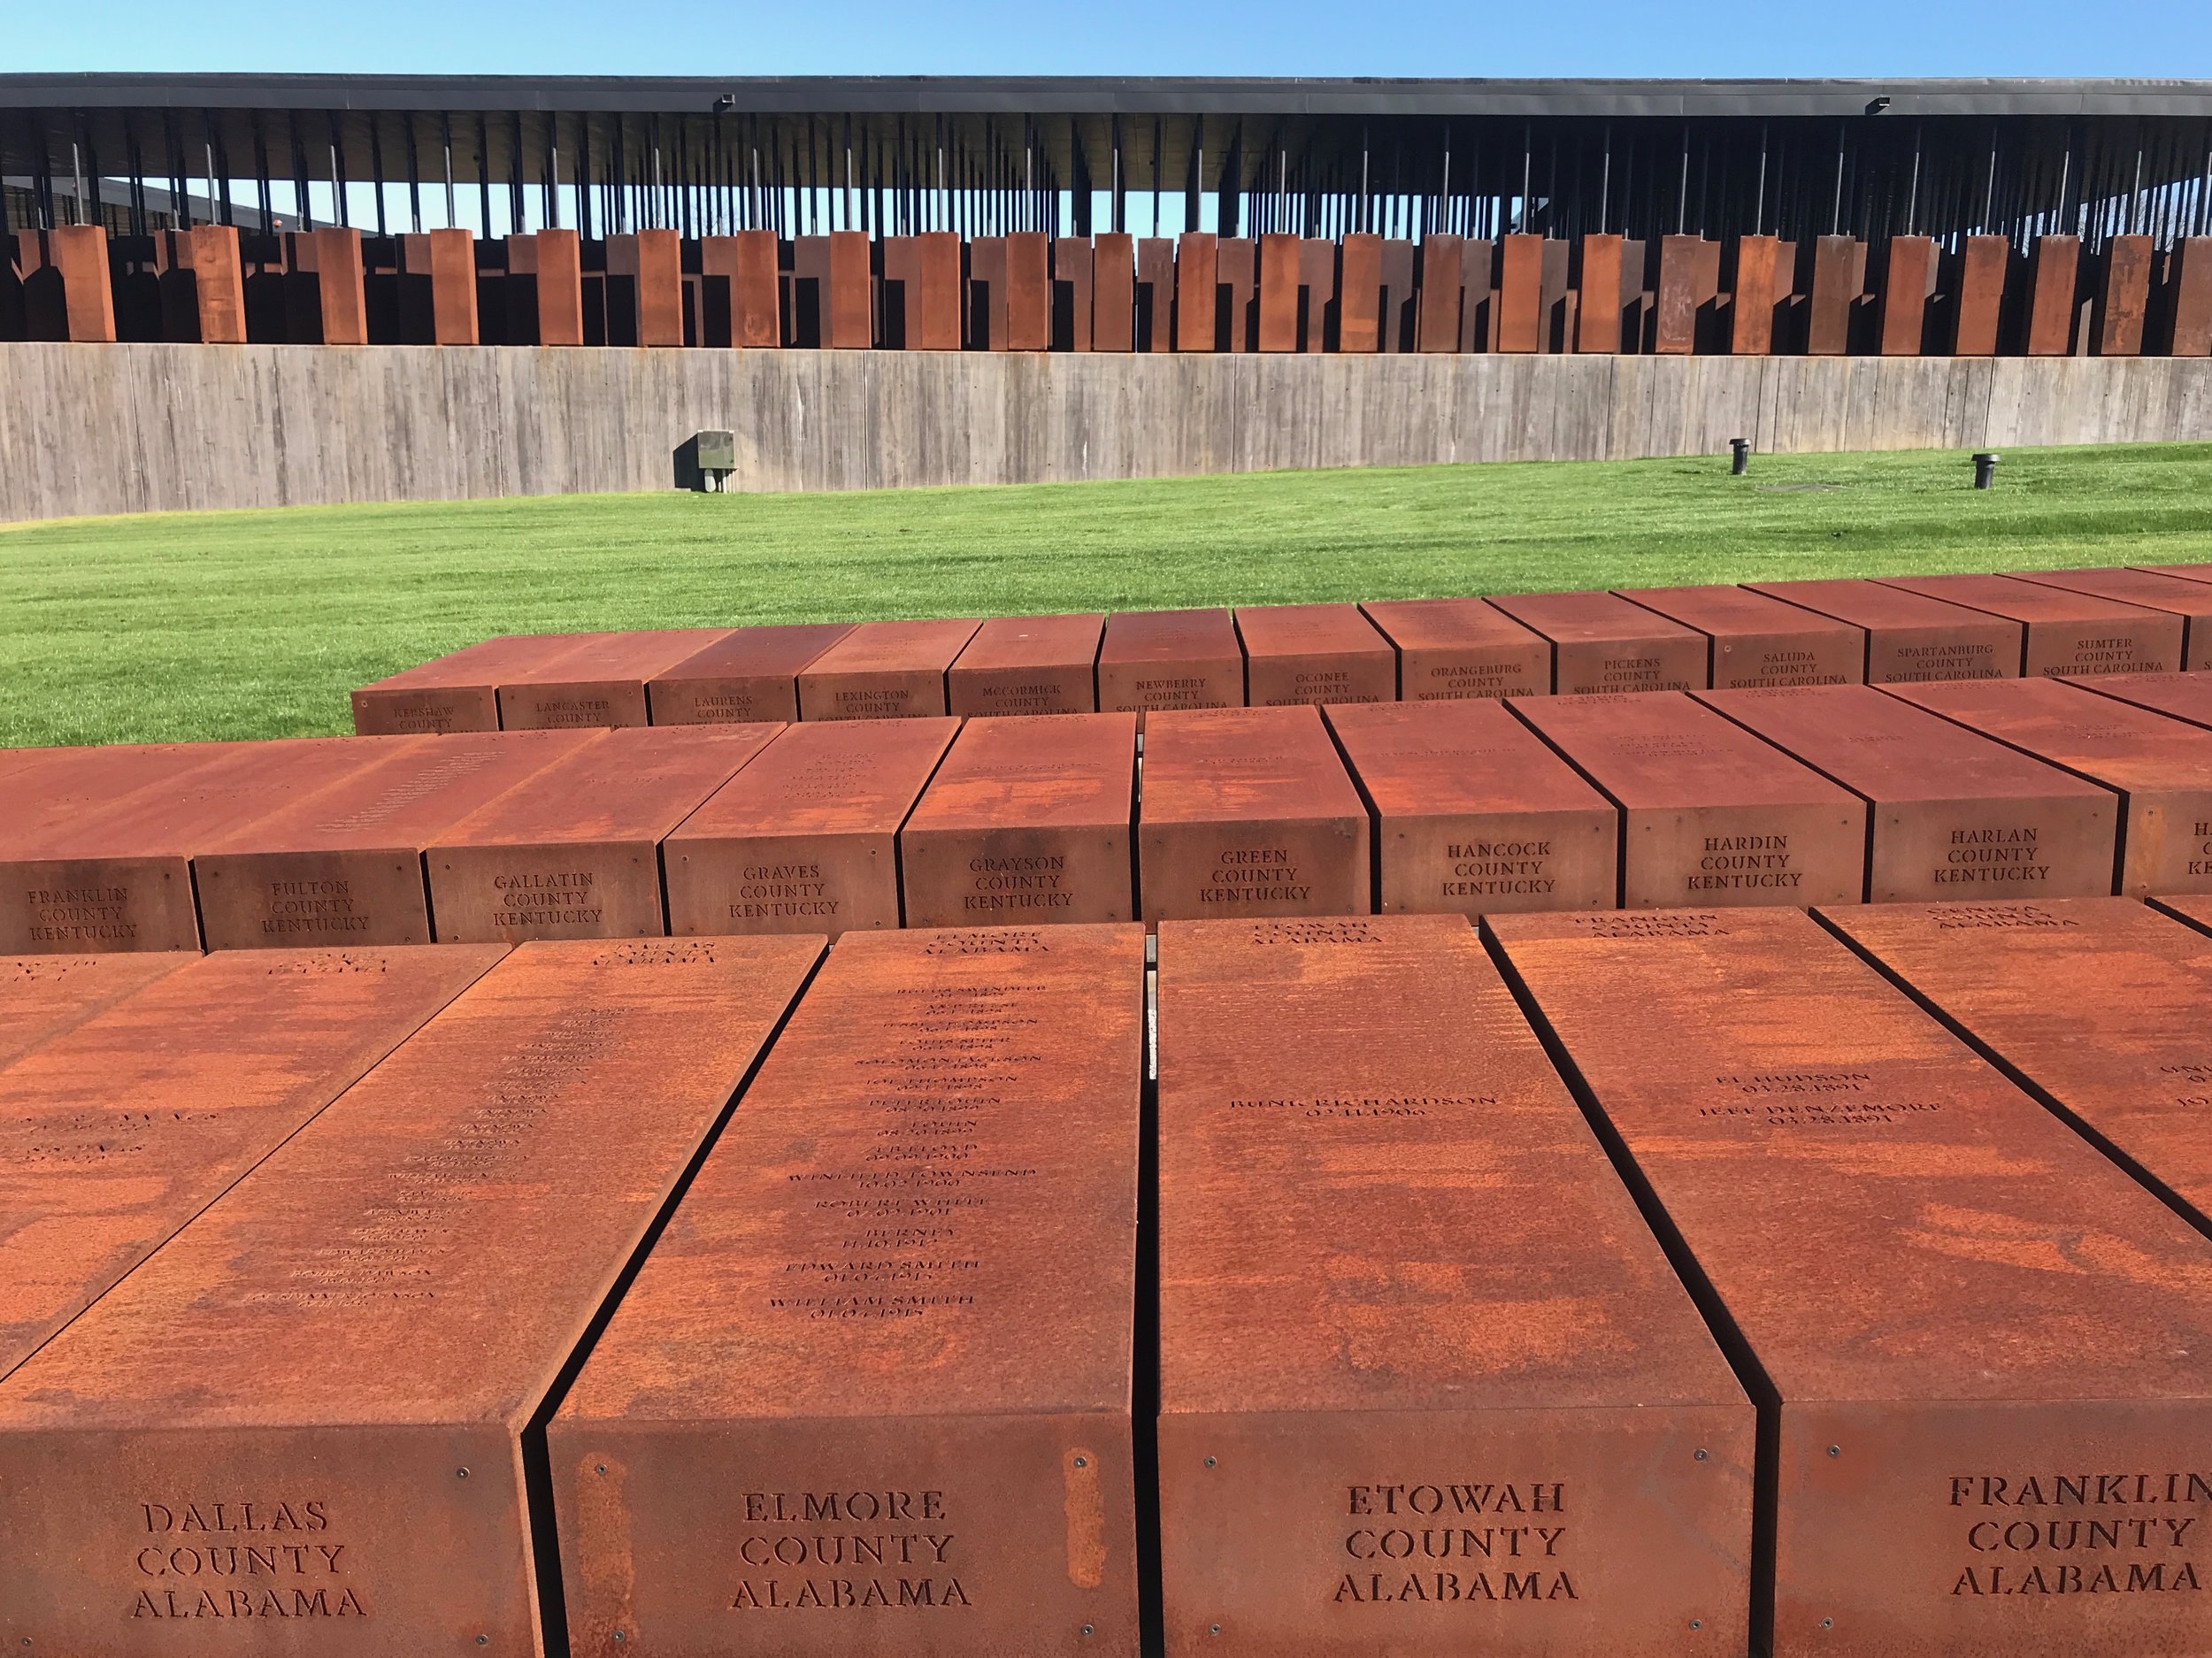  The Equal Justice Initiative, which is responsible for building Montgomery’s lynching memorial, made duplicates of the steel slabs, which they hope will find a permanent home in the counties where the lynchings occurred.      